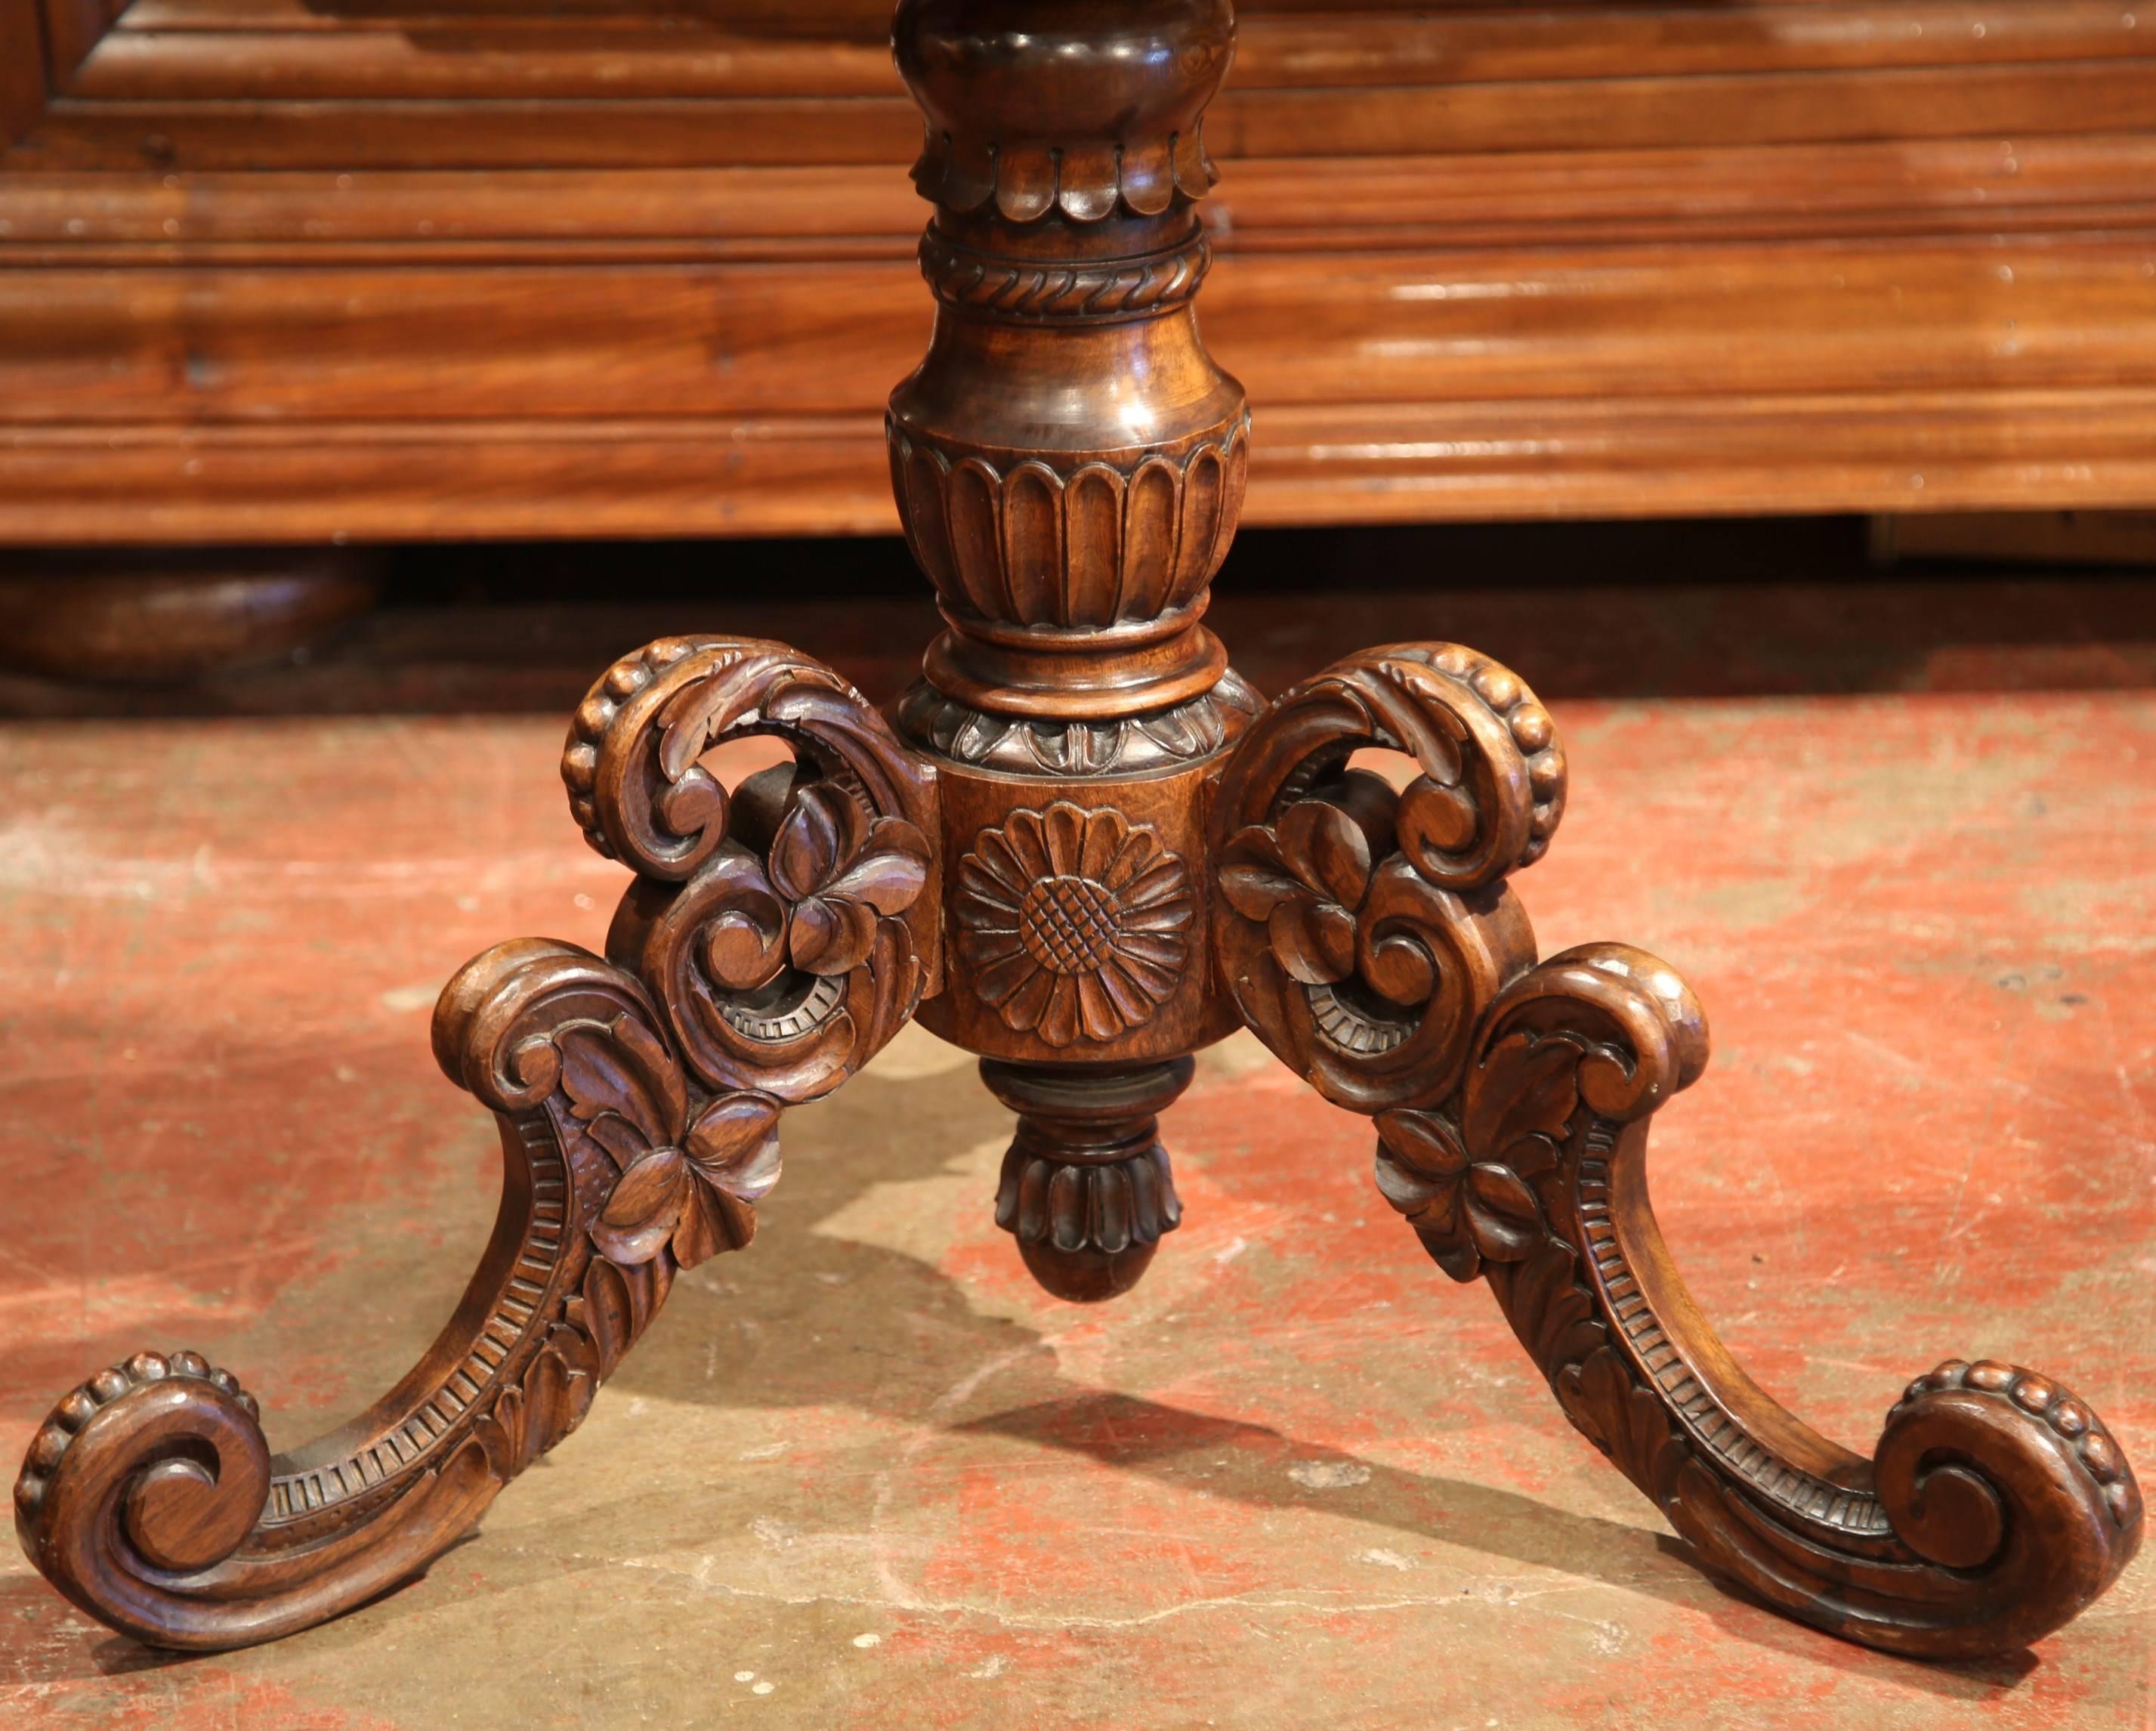 Crafted in Switzerland, circa 1870 and oval in shape, the antique occasional table features a tilt-top surface over a carved stem and an ornate pedestal base ending with three scrolled legs. The shaped and scalloped top has beautiful, illustrative